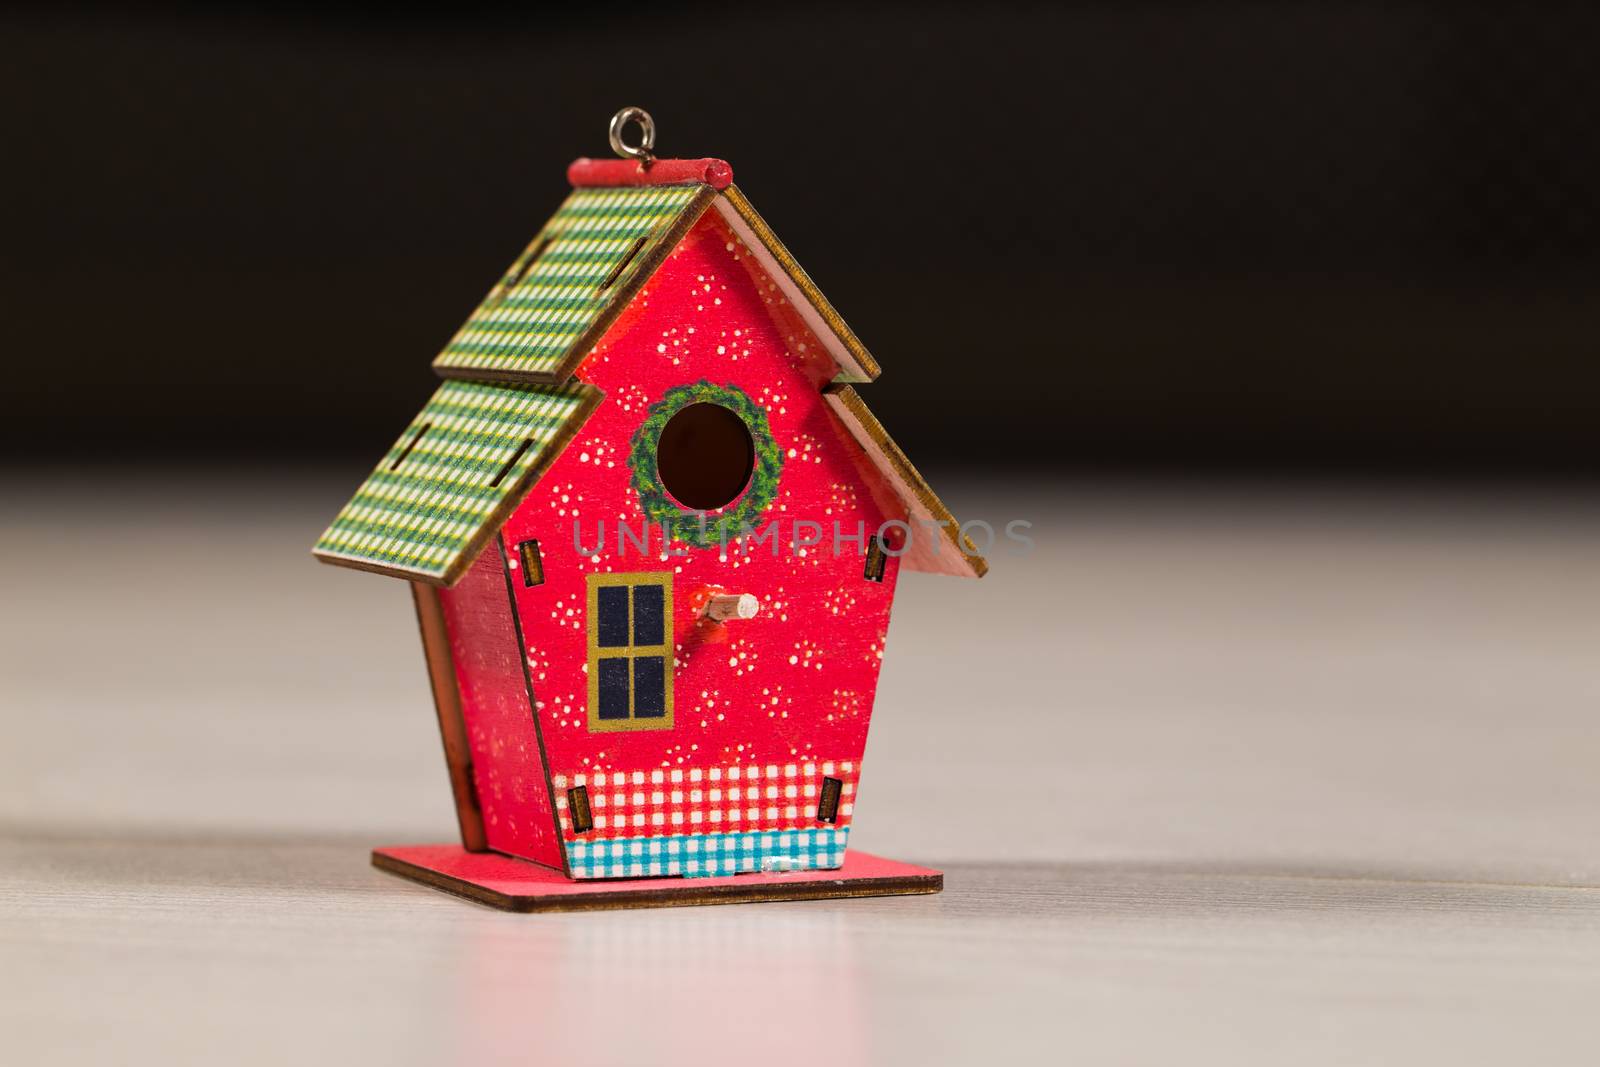 red Birdhouse on the background